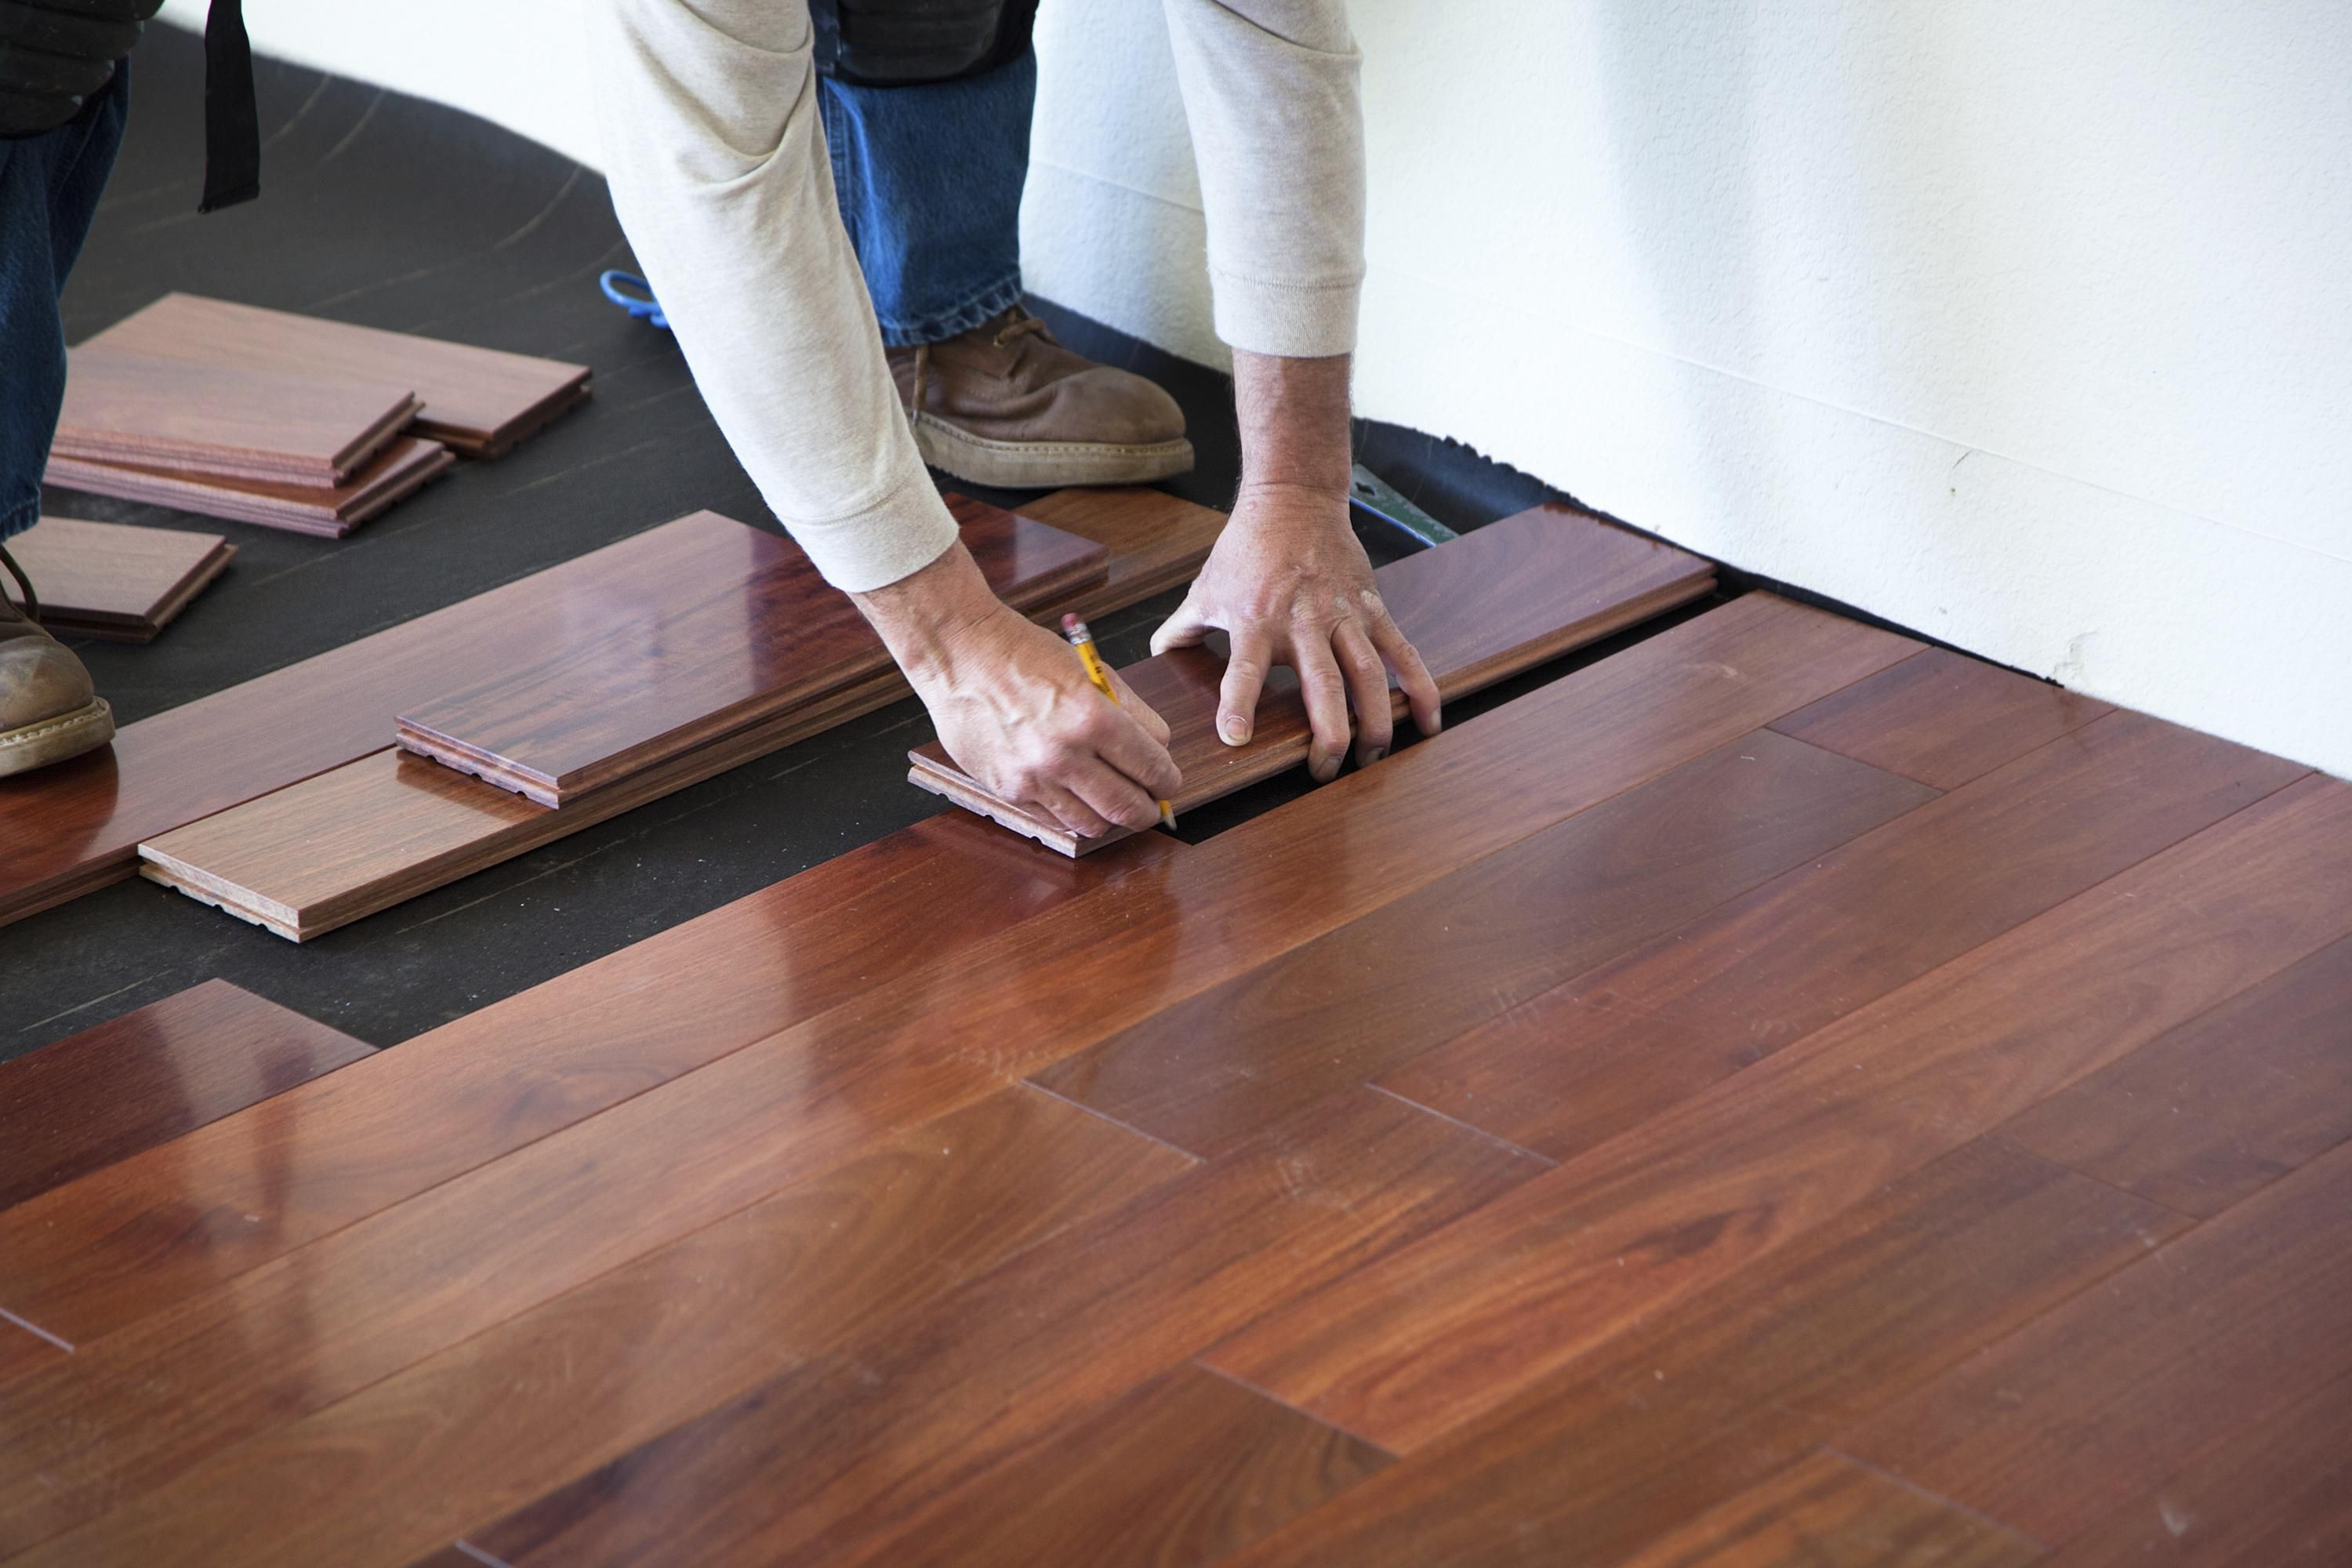 How to Refinish Hardwood Floors Under Carpet Of 18 New How Much Do Hardwood Floors Cost Image Dizpos Com Inside How Much Do Hardwood Floors Cost Inspirational This is How Much Hardwood Flooring to order Images